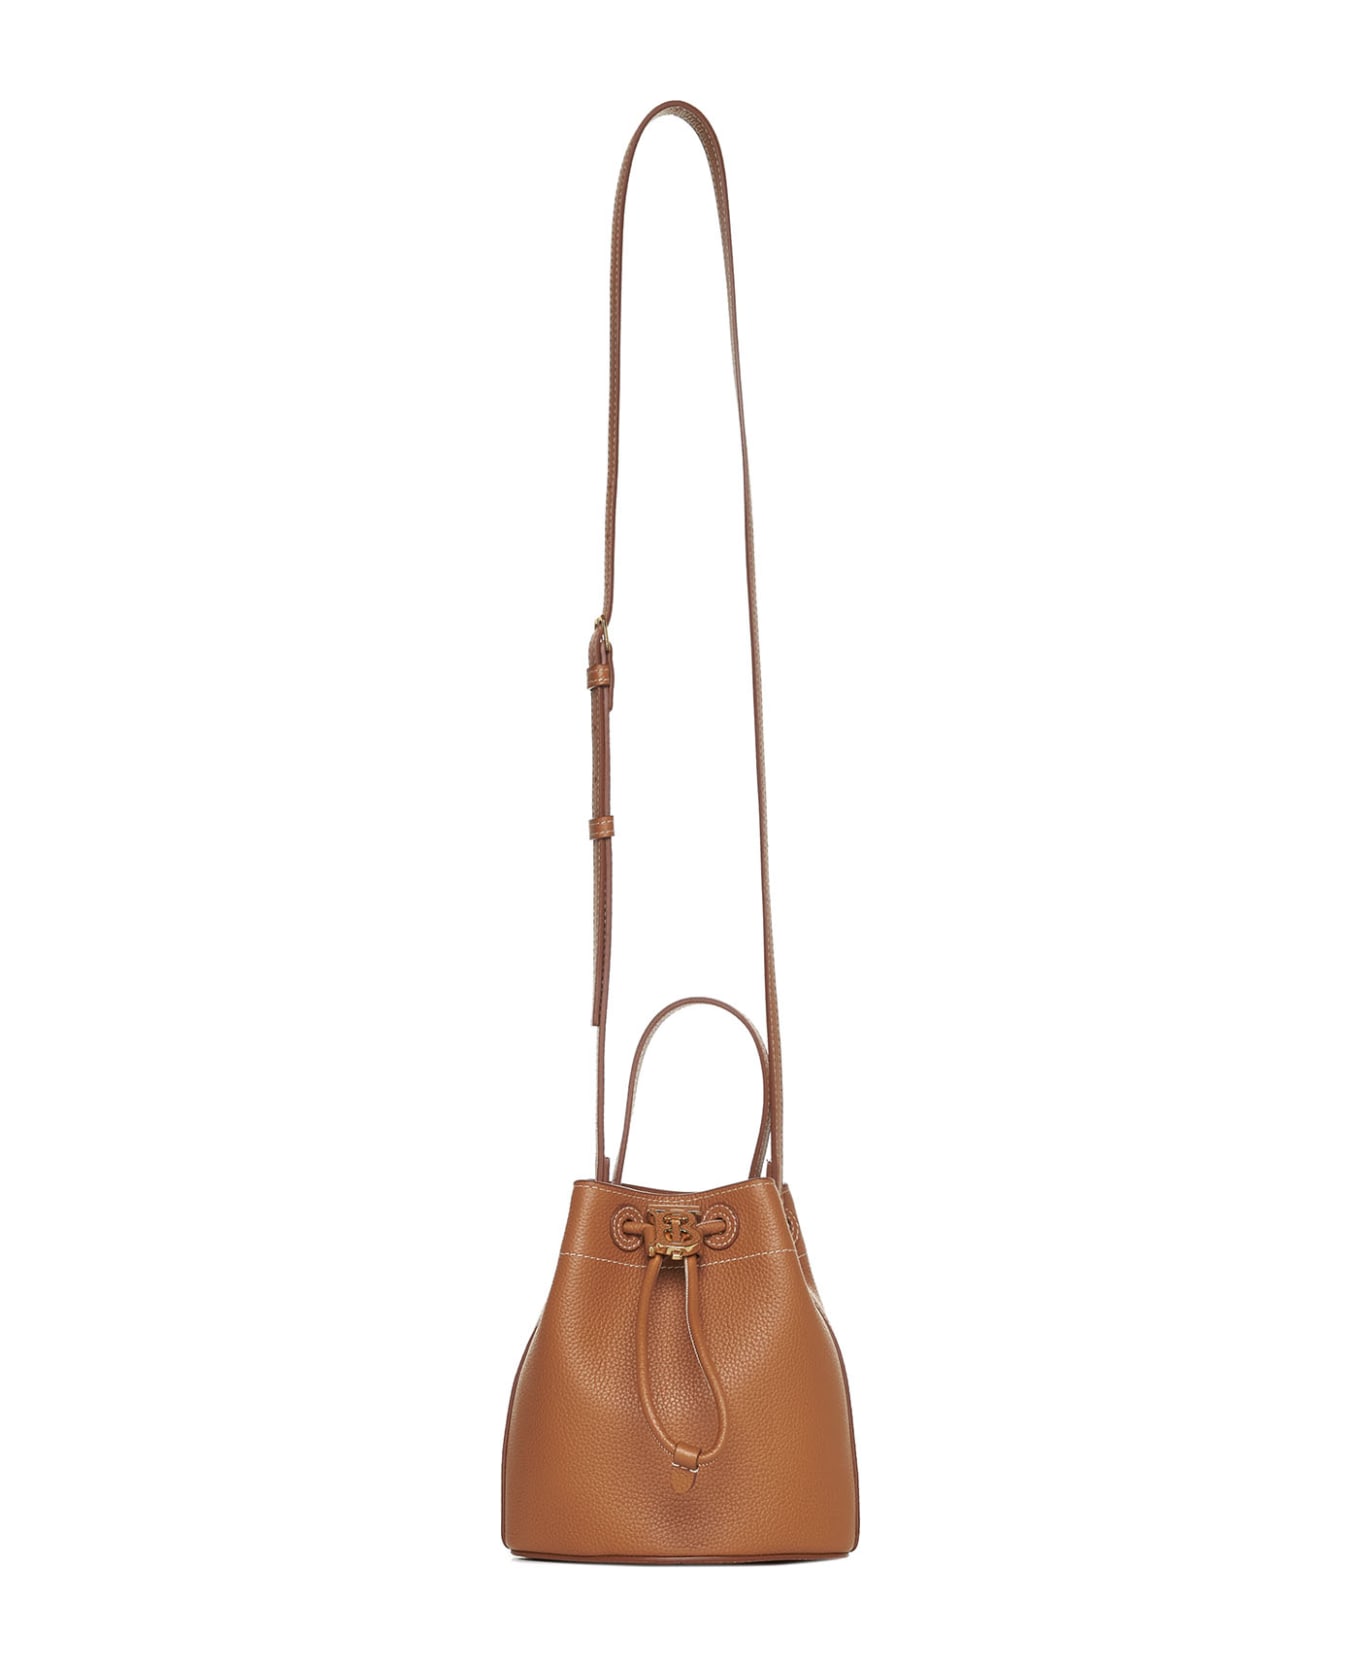 Burberry Tote - Warm russet brown